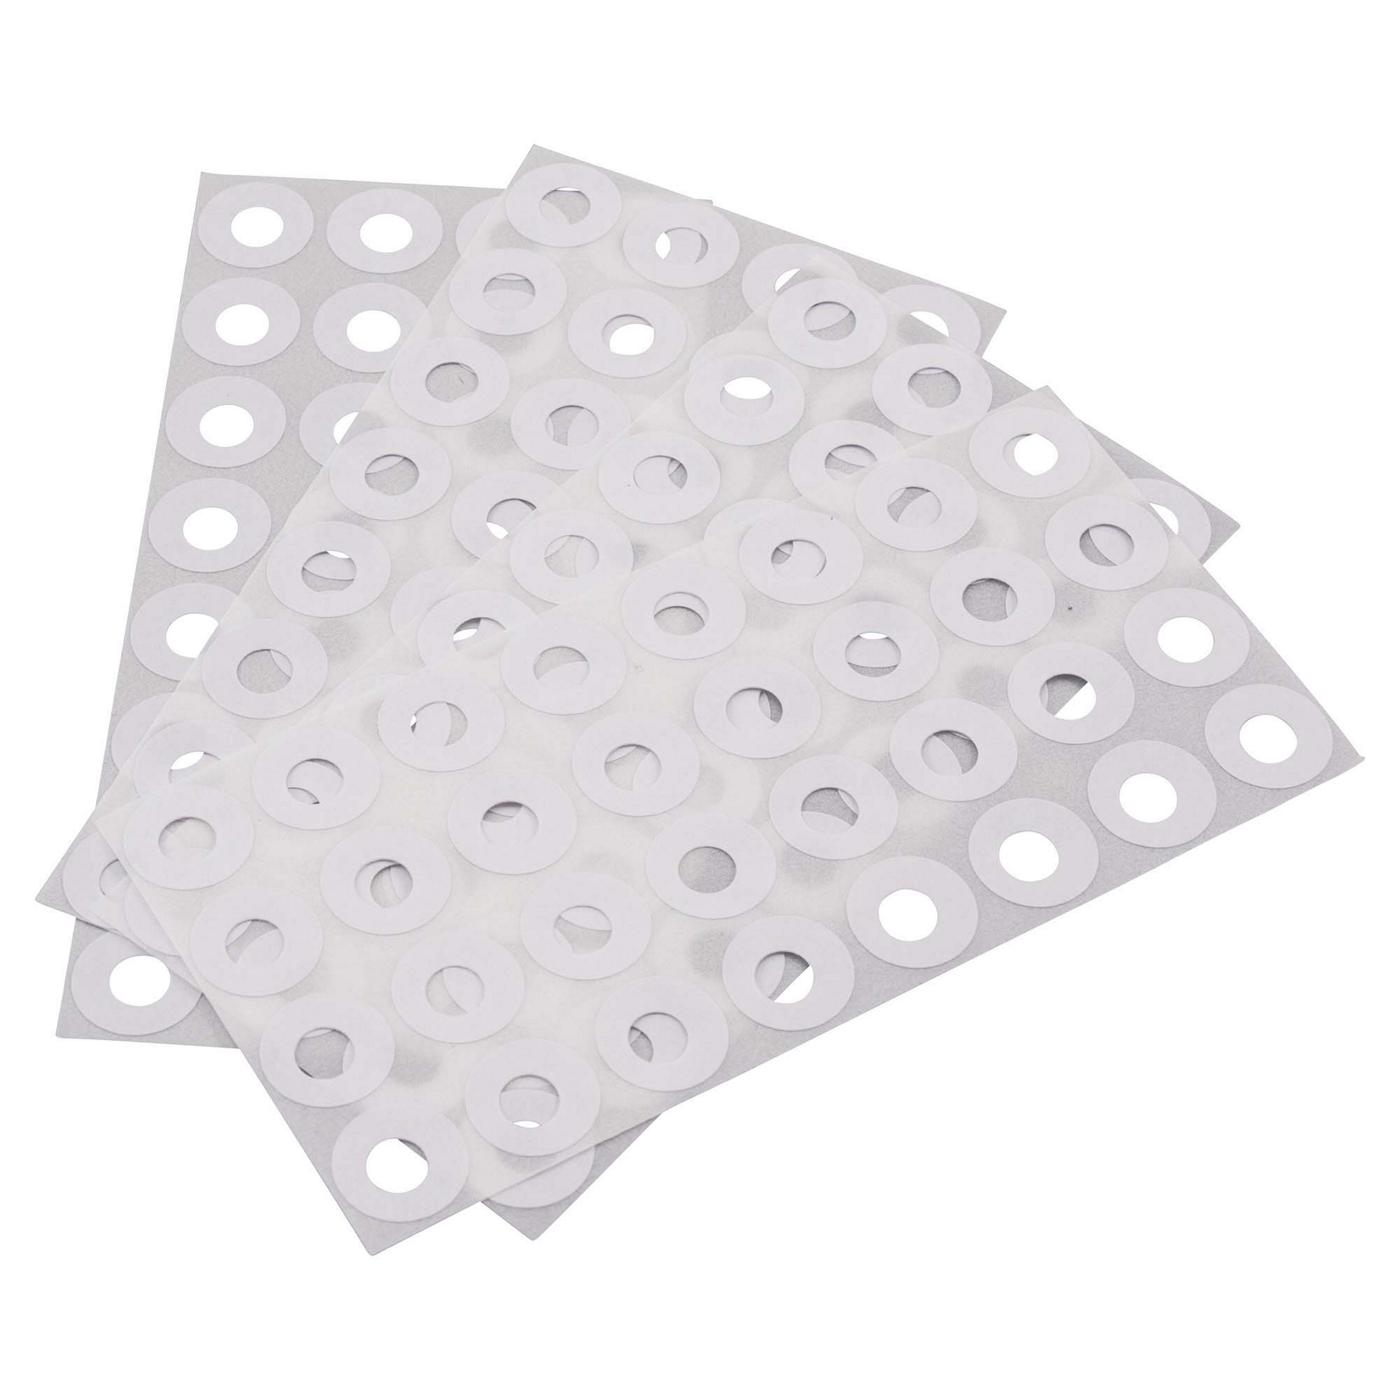  GELRHONR Reinforcement Labels, self-Adhesive Reinforcement  Ring Labels for Repairing and Strengthening Punched Holes 500 Pack -  Transparent : Office Products